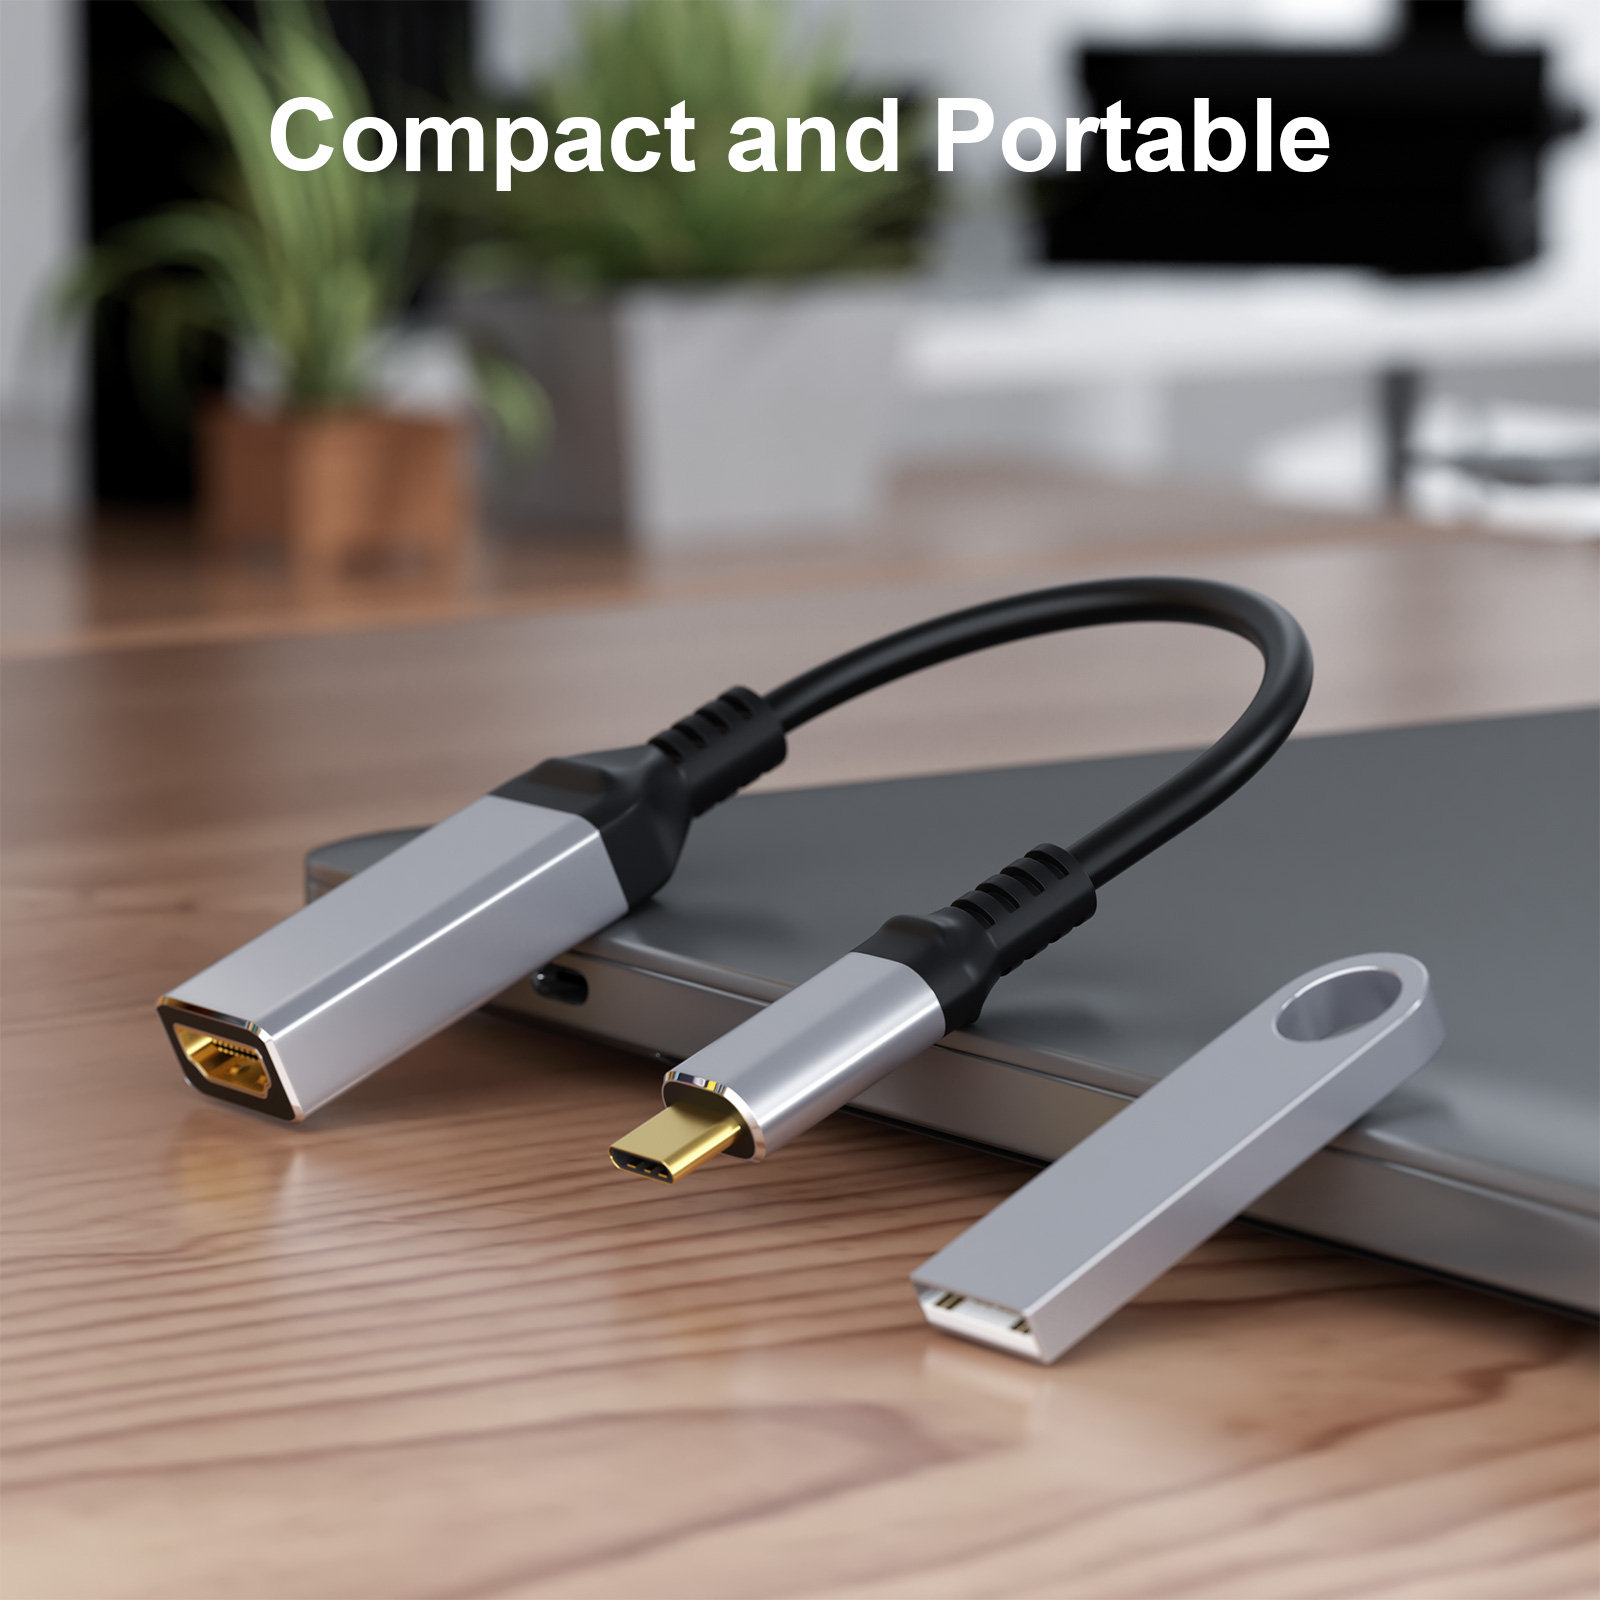 CABLEDECONN USB C USB3.1 to HDMI 8K 2.1 Cable 25cm Male to Female 8K@30Hz 4K@120Hz UHD HDR High Speed 48Gbps Thunderbolt 3 Compatible for HDTVs Projectors and Monitors F0208